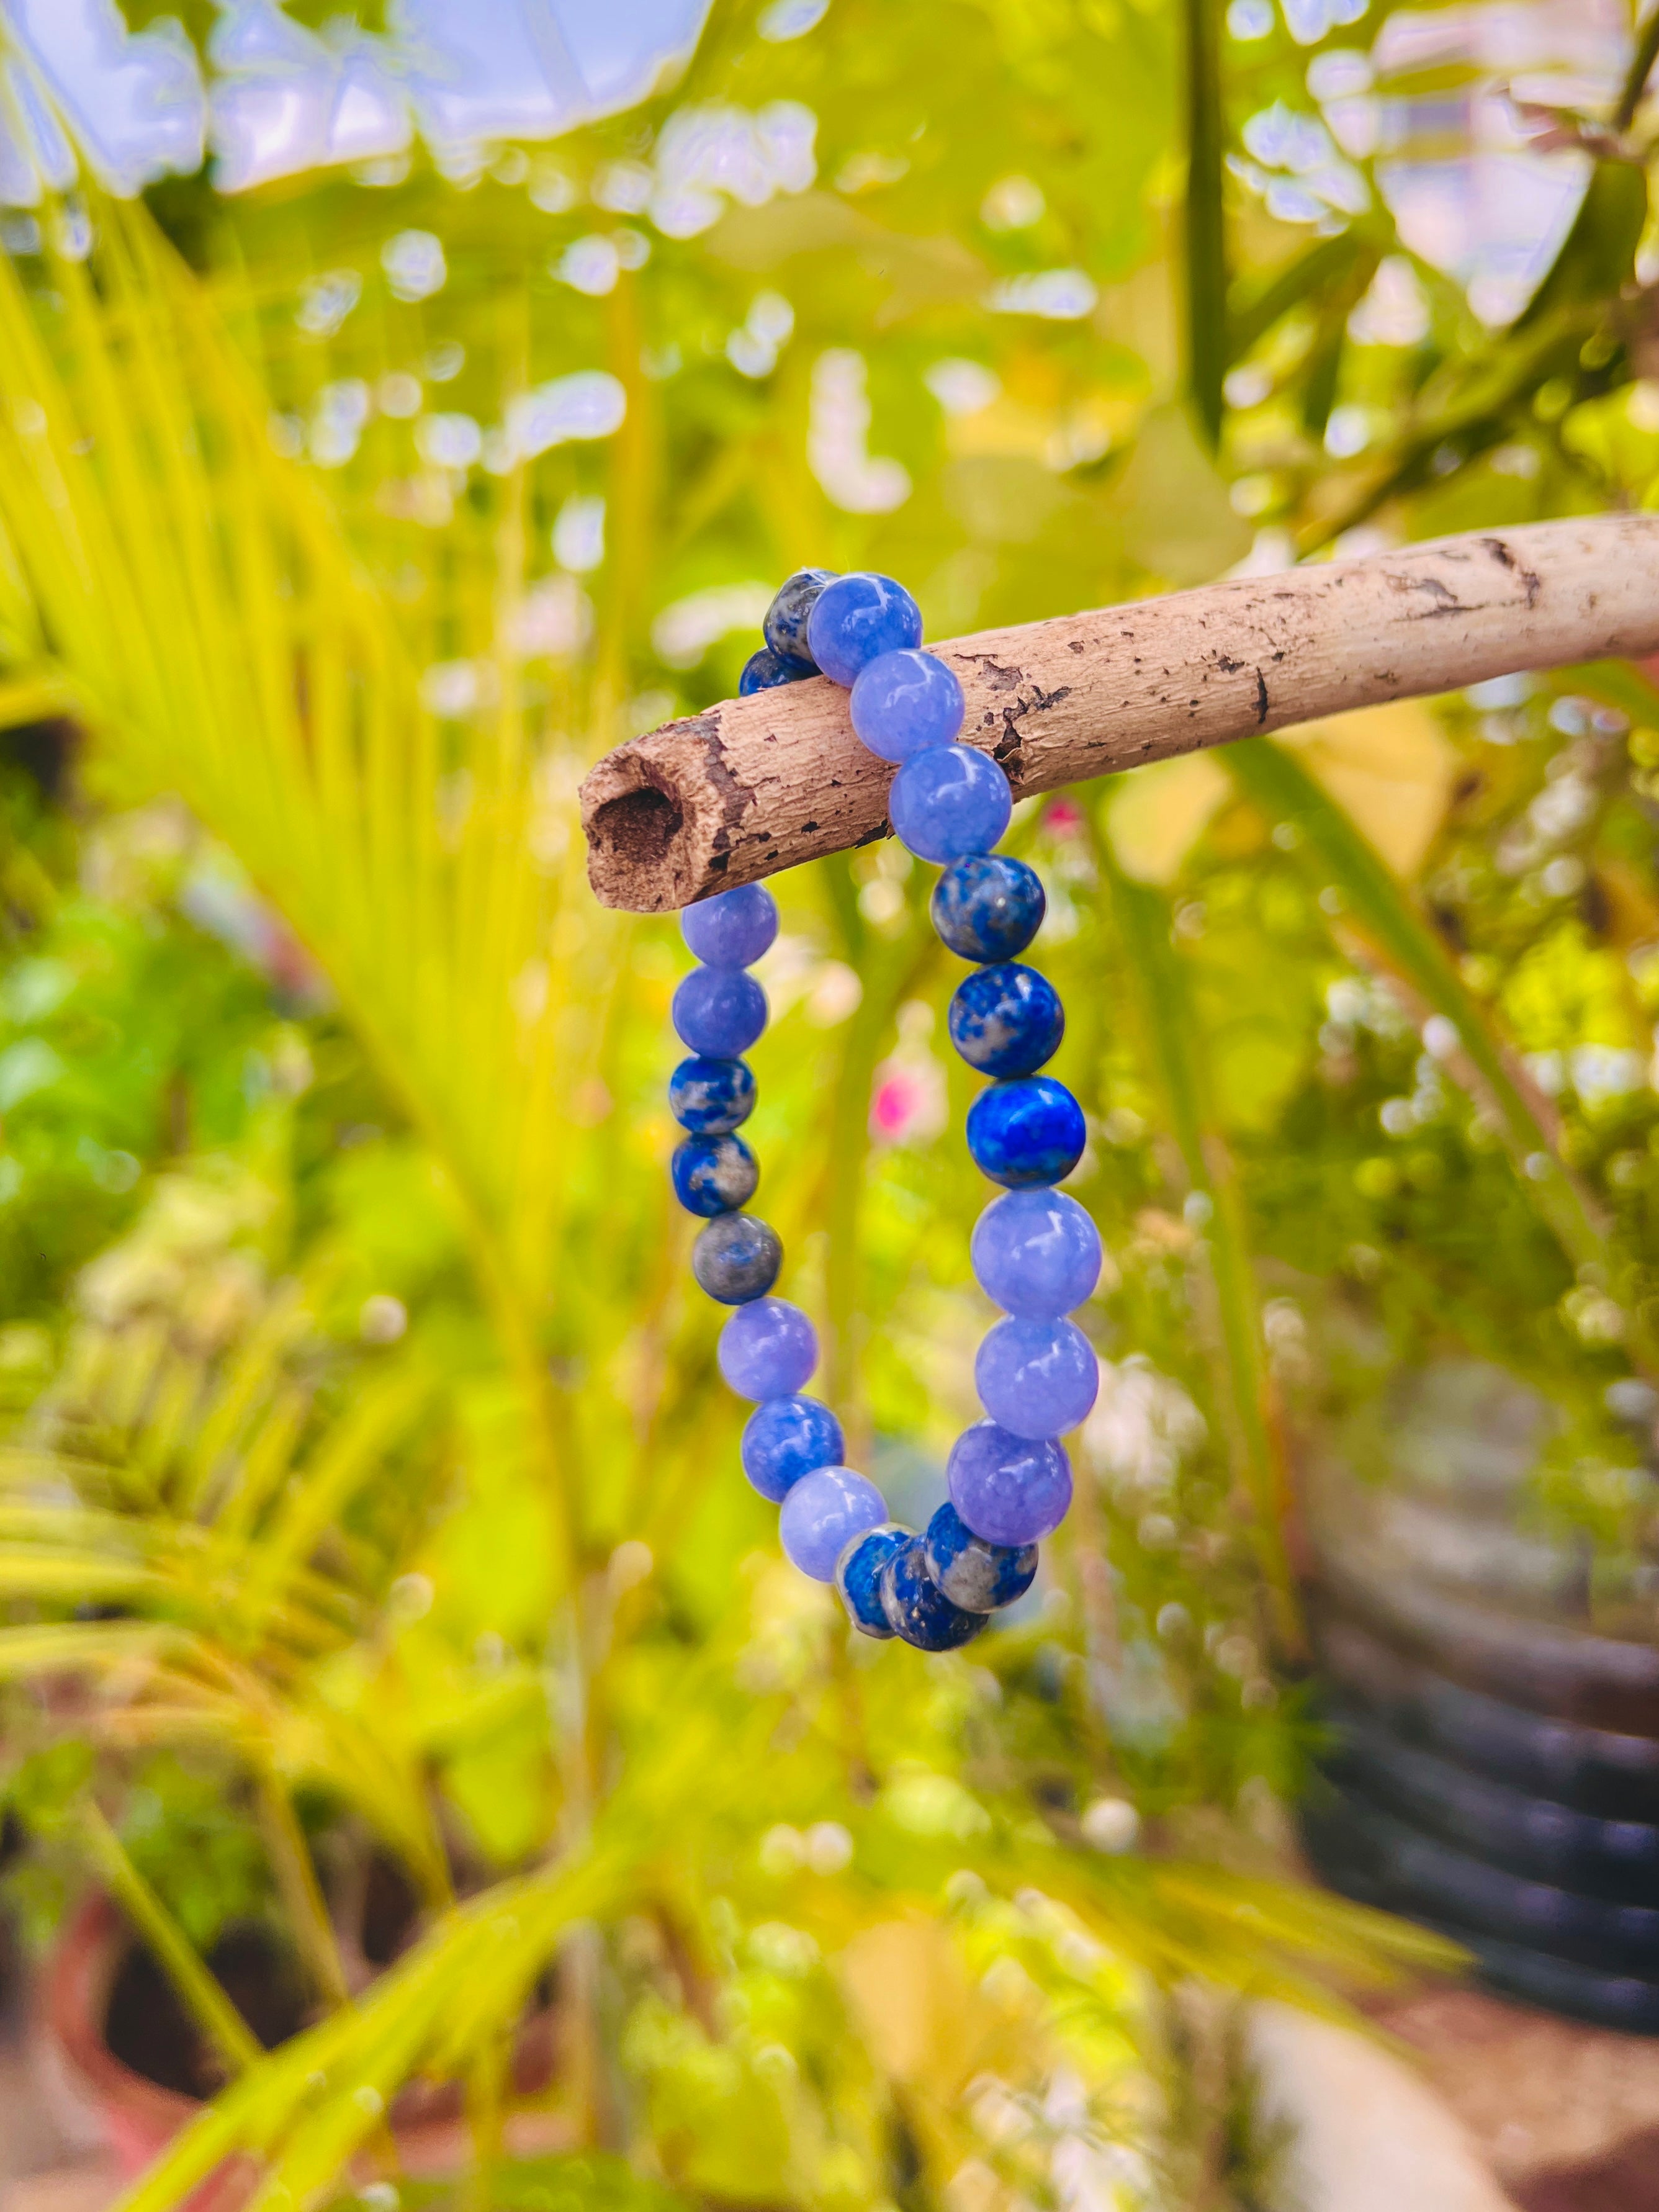 Natural 8mm Lapis Lazuli Beaded Bracelet for Mind Protection Anxiety Relief  | eBay